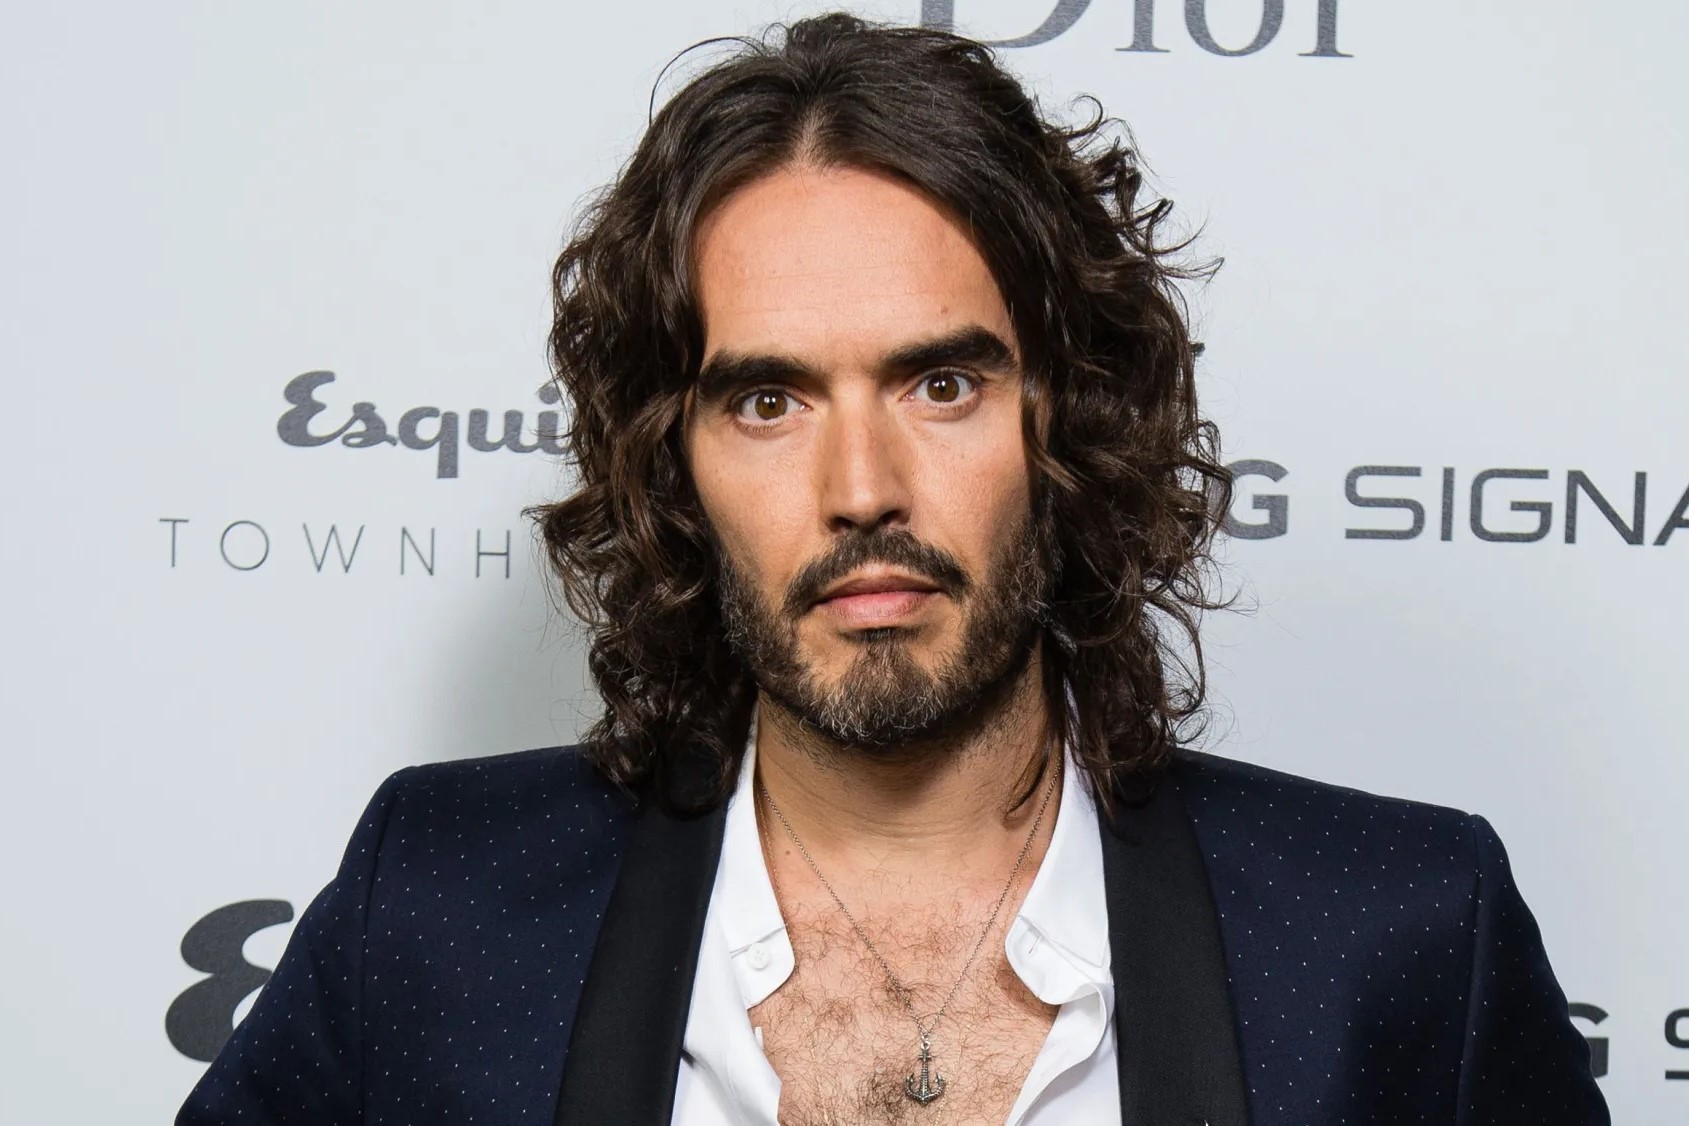 Russell Brand's Mind-Blowing IQ Revealed!